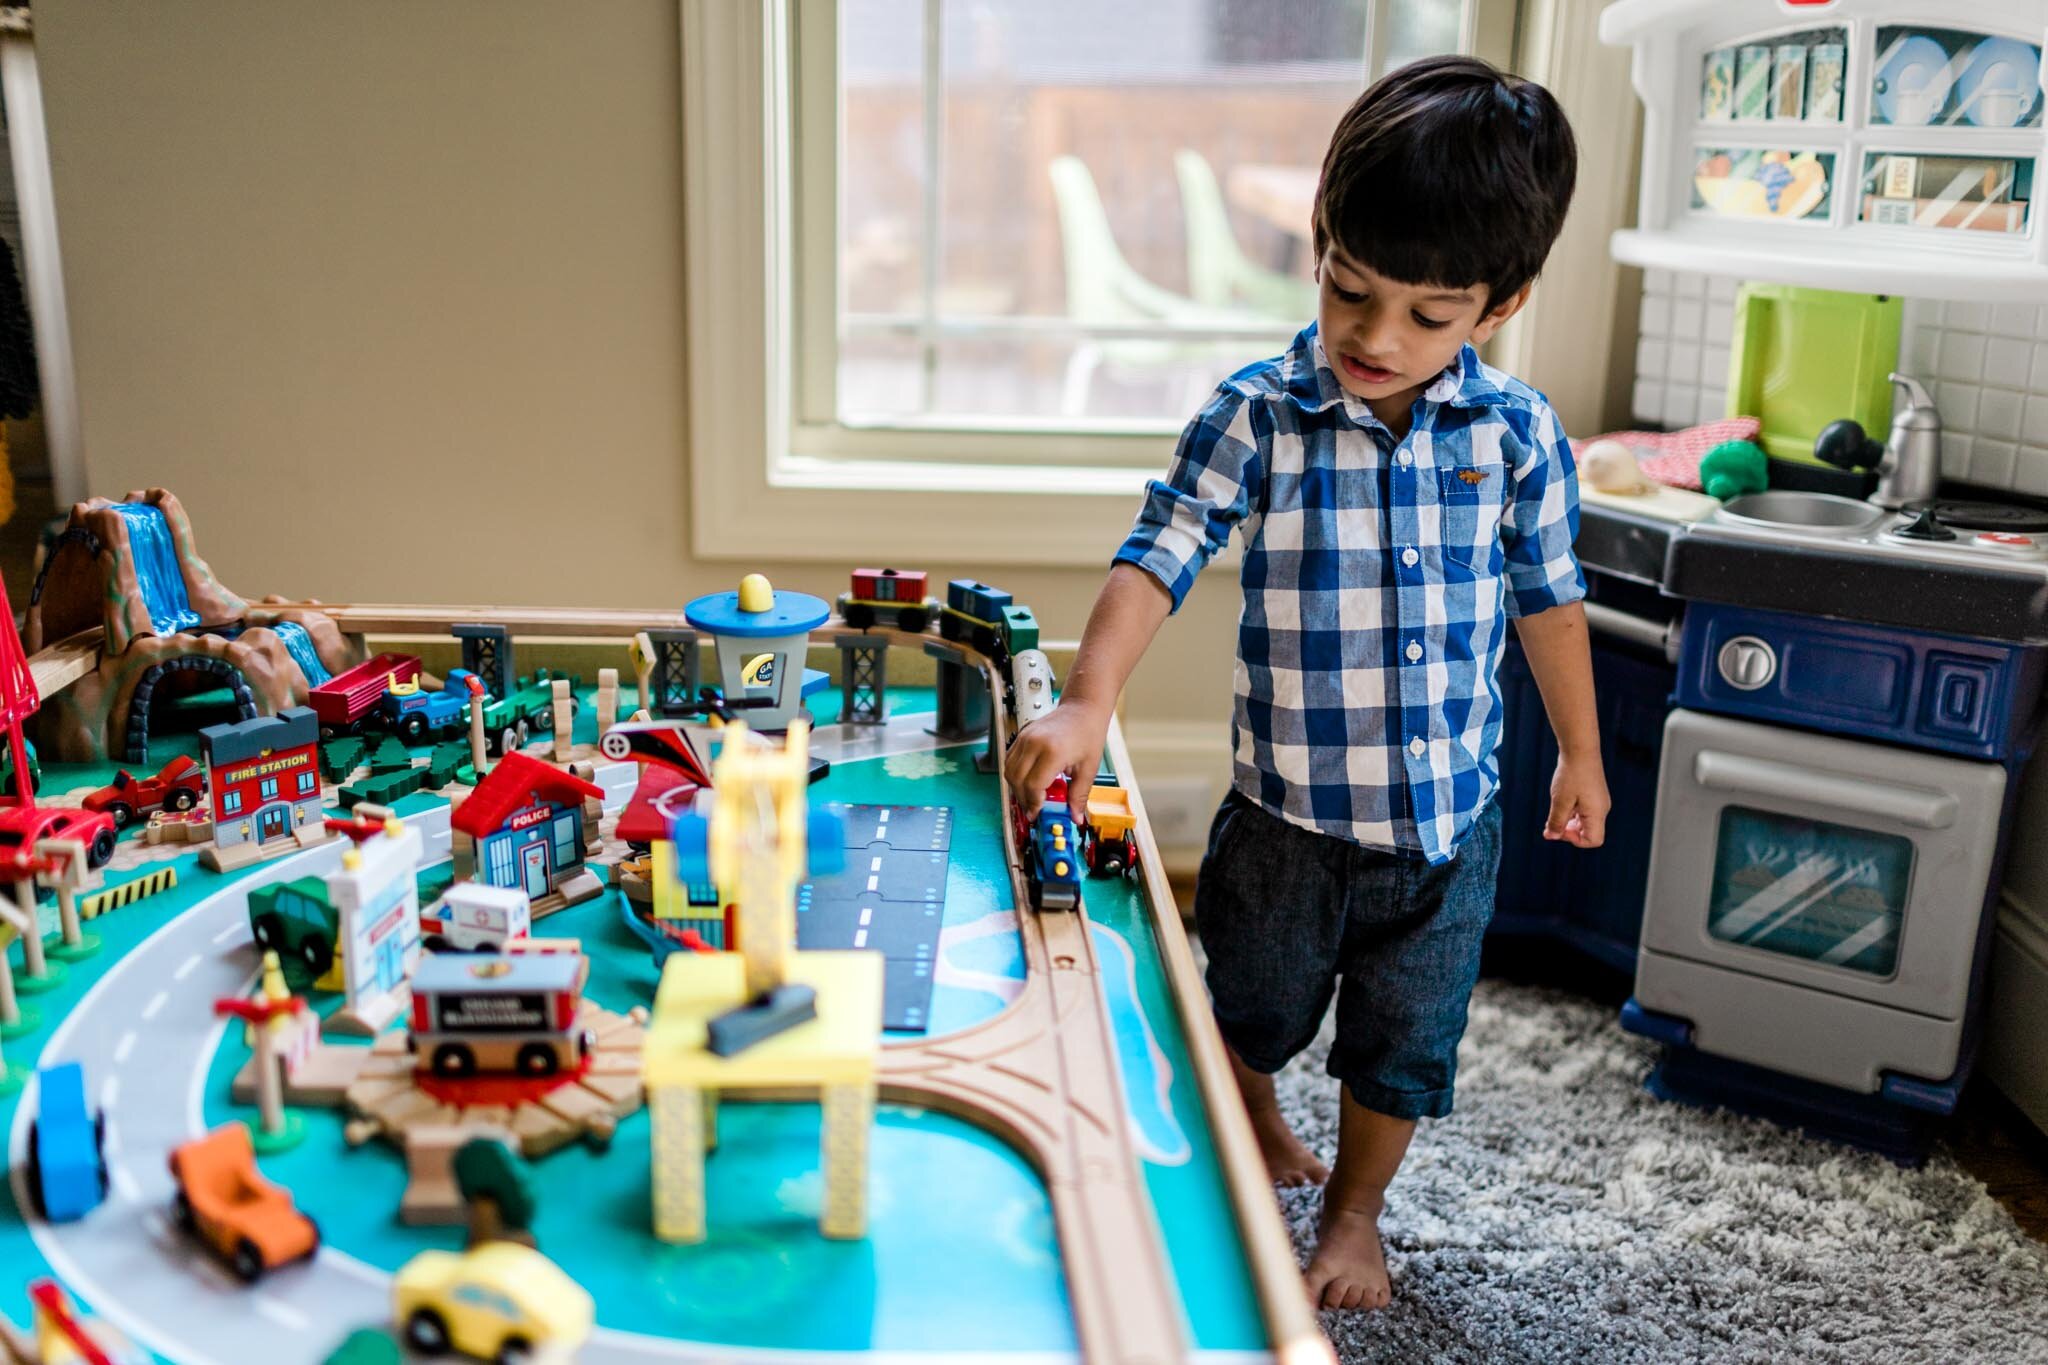 Durham Photographer | By G. Lin Photography | Boy playing with trains inside home